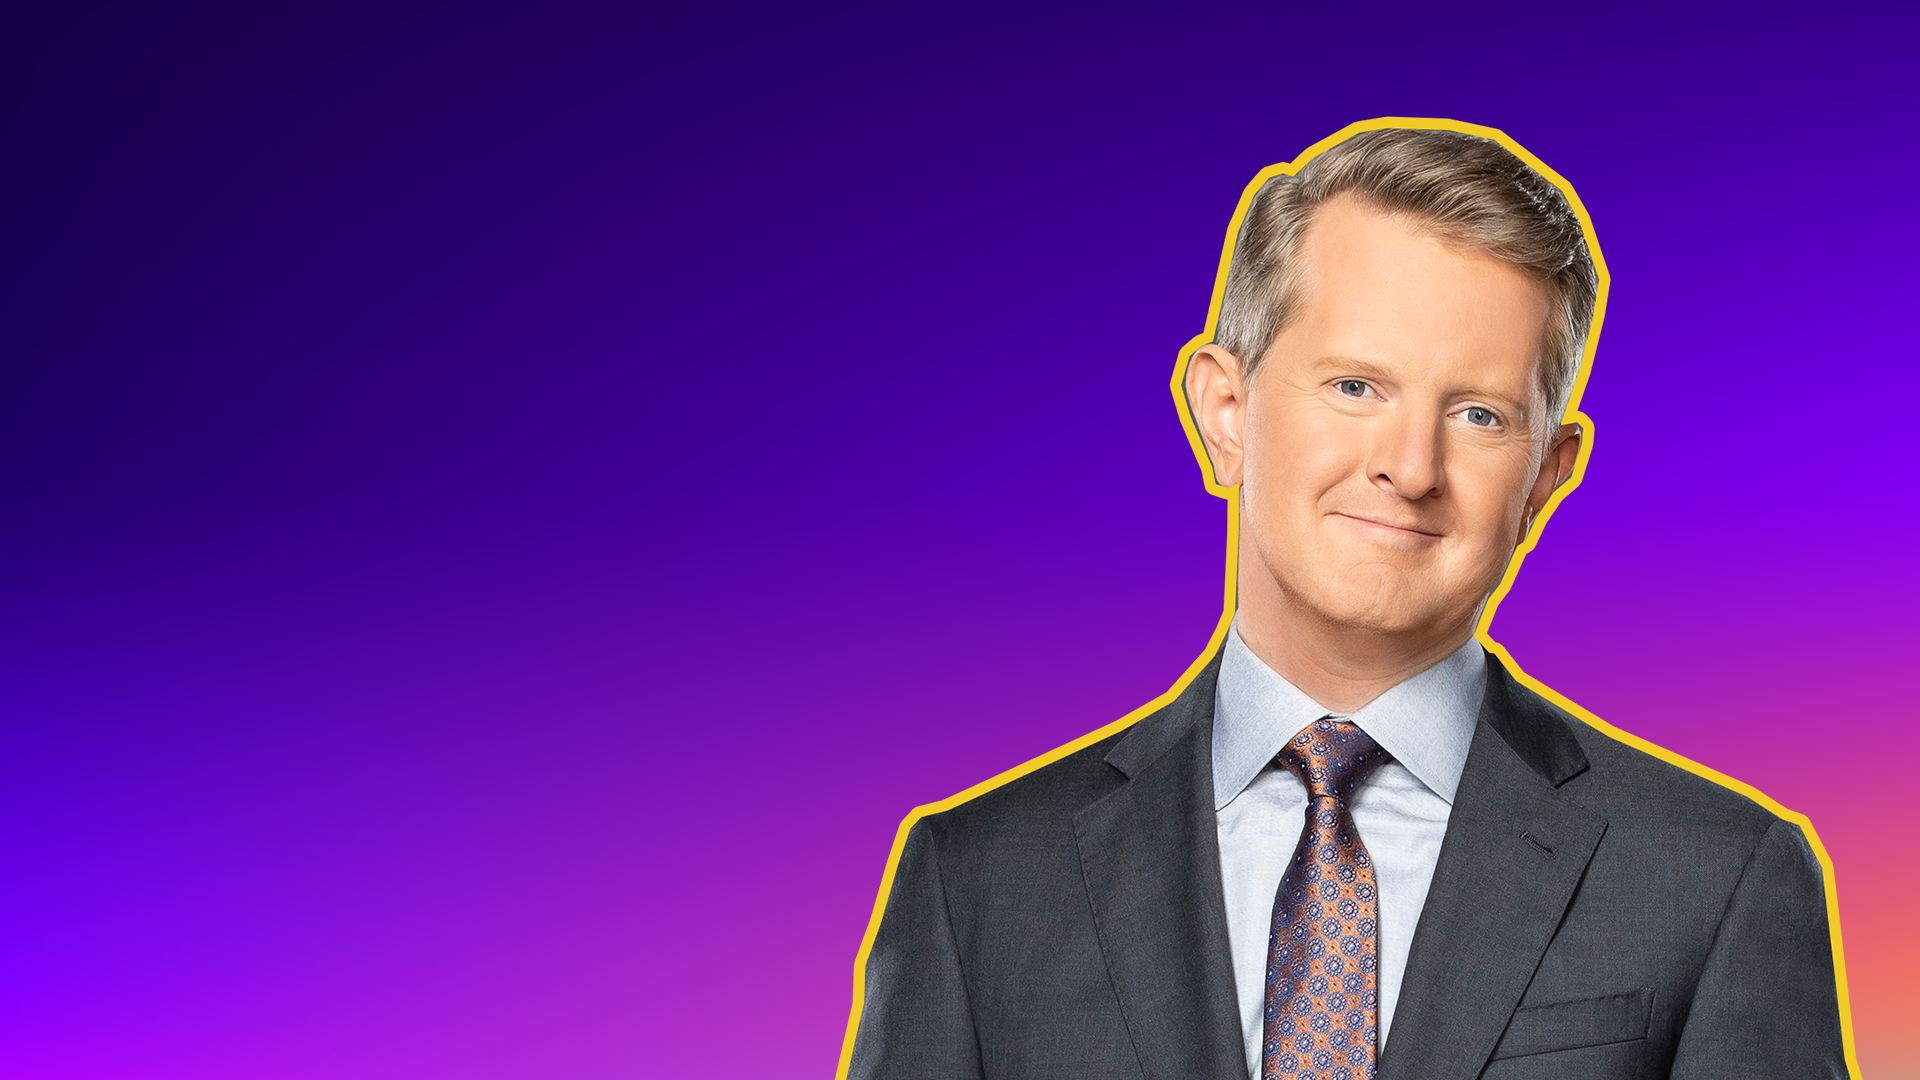 Jeopardy!’s Ken Jennings talks ChatGPT, life in Seattle and more